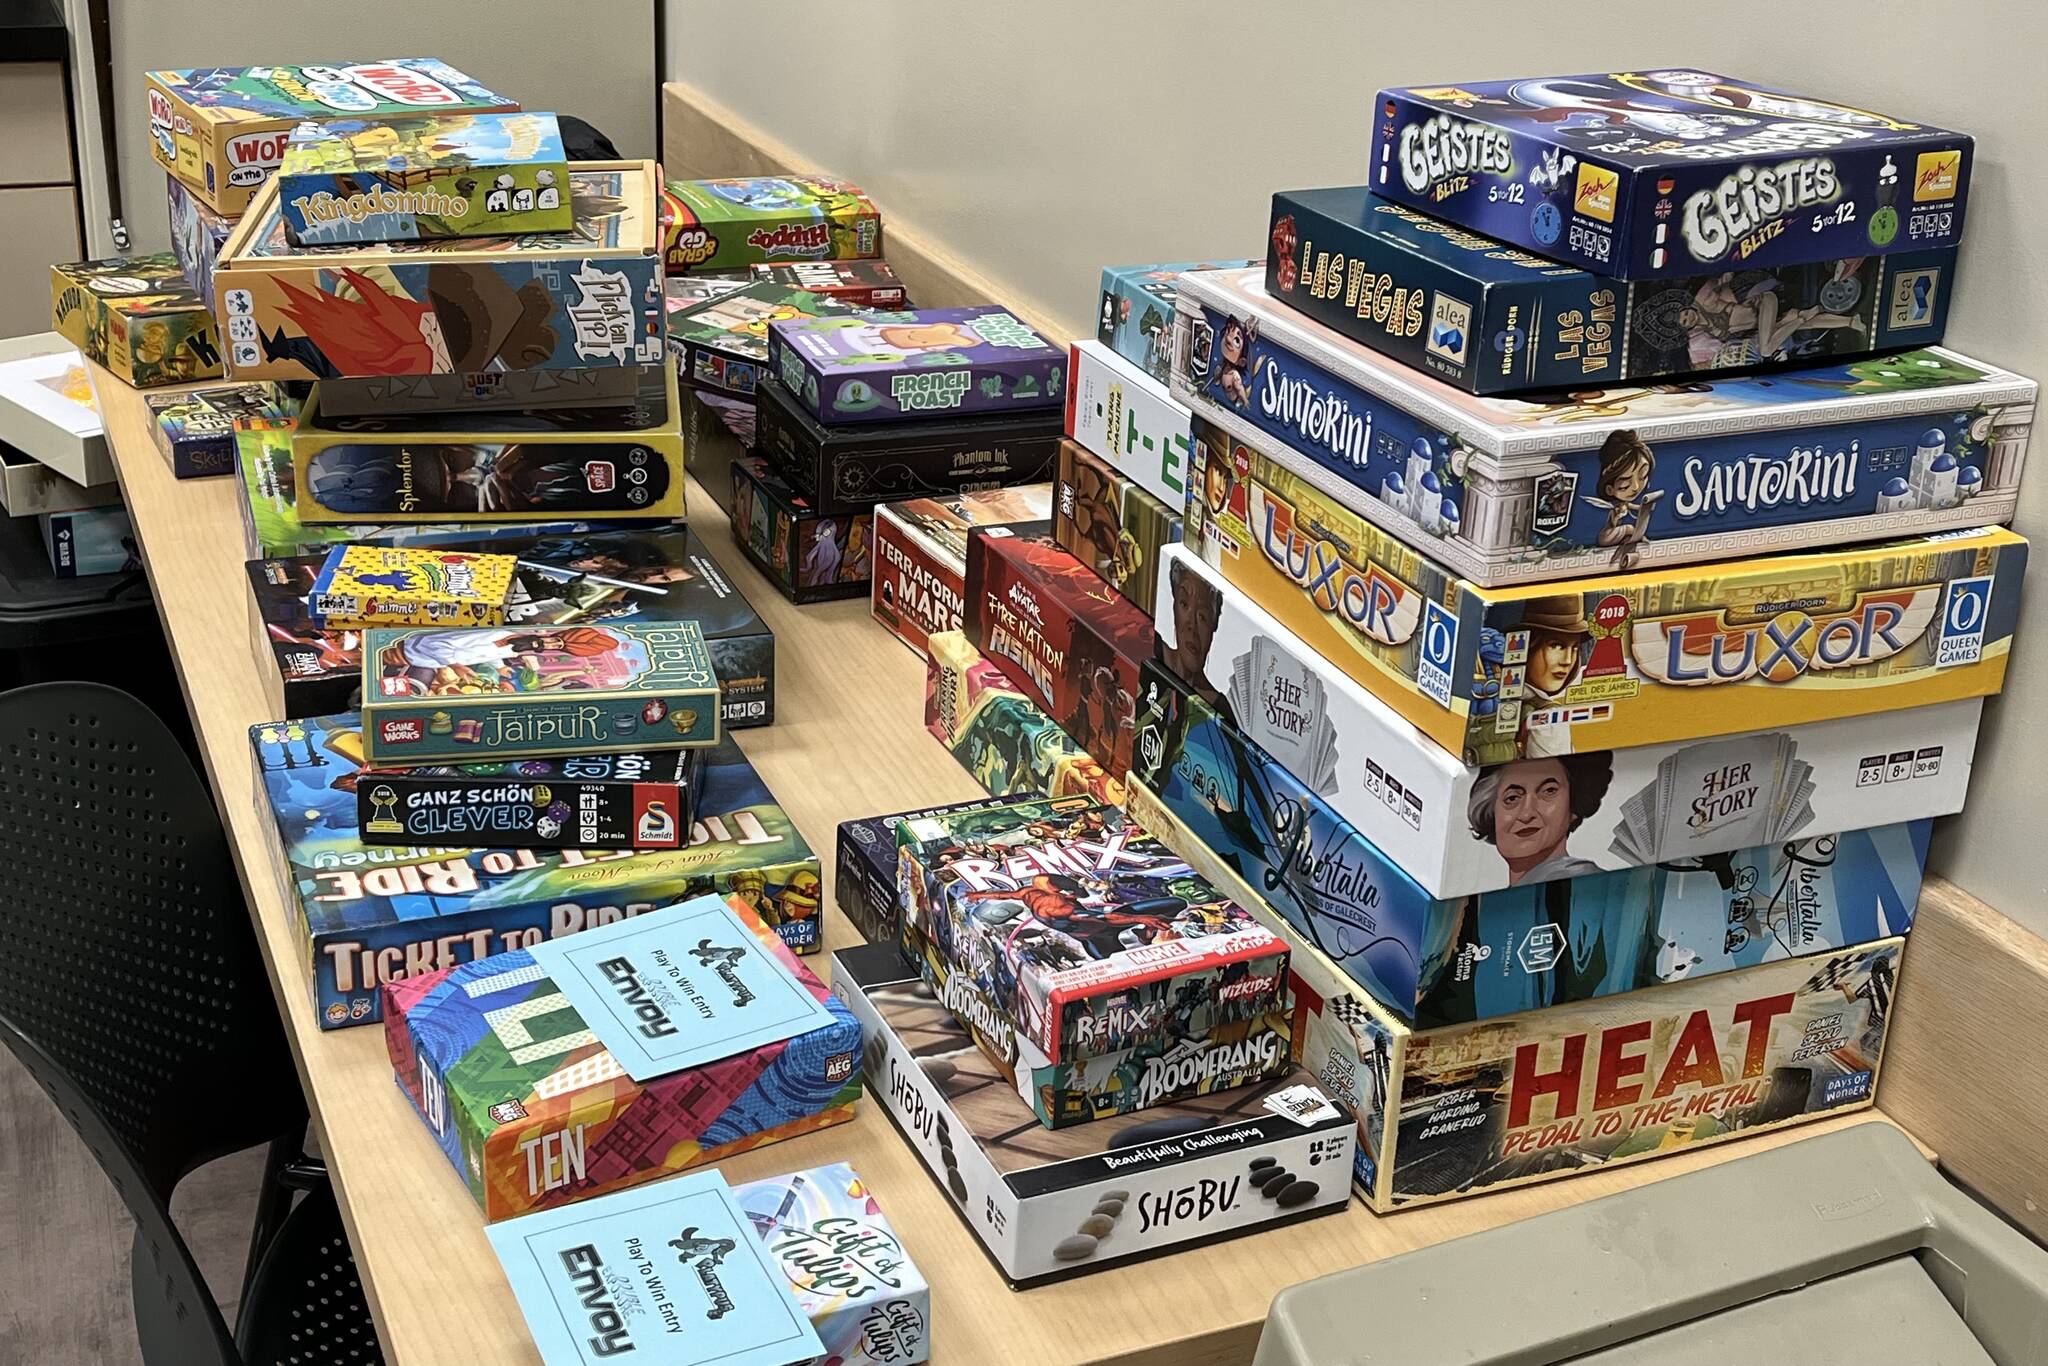 Juneau residents will choose from a variety of games found here on Saturday at Platypus Gaming's mini-convention weekend at the Juneau Public Library.  (Johnson Kuhn / Juno Empire)